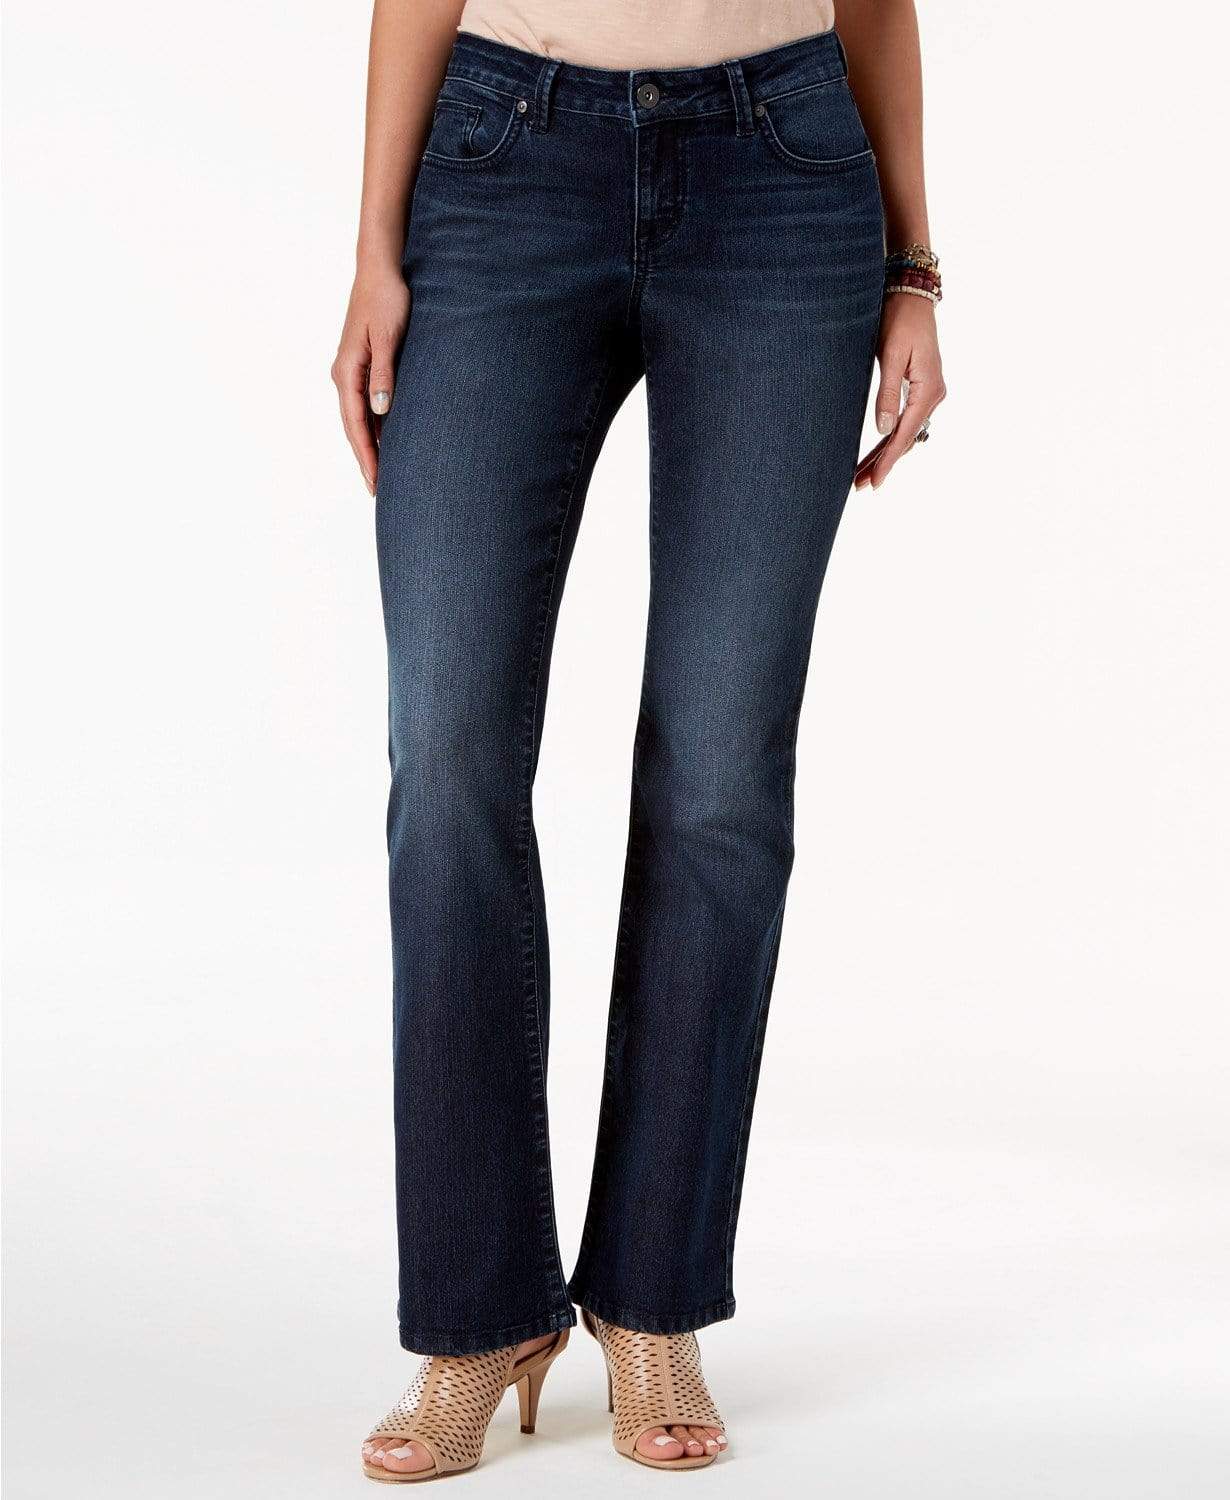 STYLE & CO Womens Bottoms STYLE & CO - Curvy Fit Bootcut Jeans